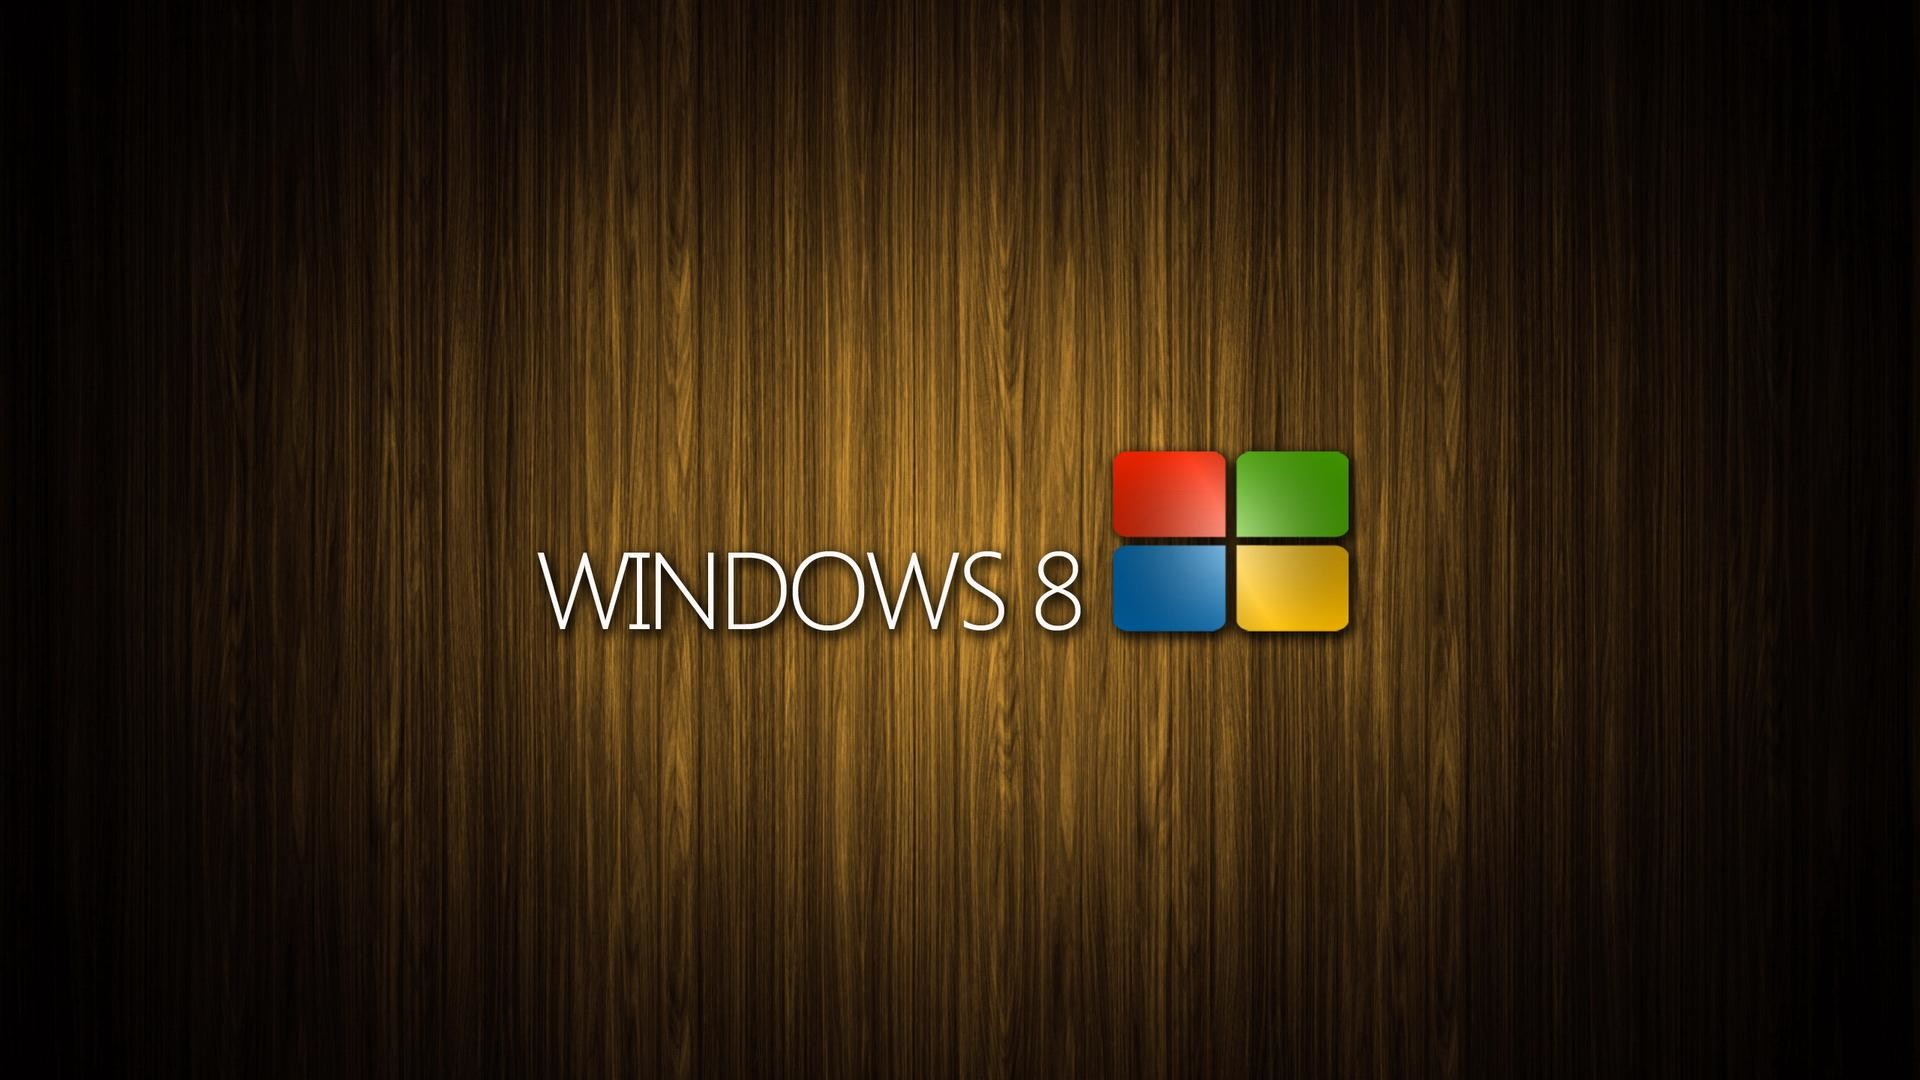 1920x1080  Windows 8 system woodiness backgrounds wide wallpapers:1280x800,1440x900,1680x1050  - hd